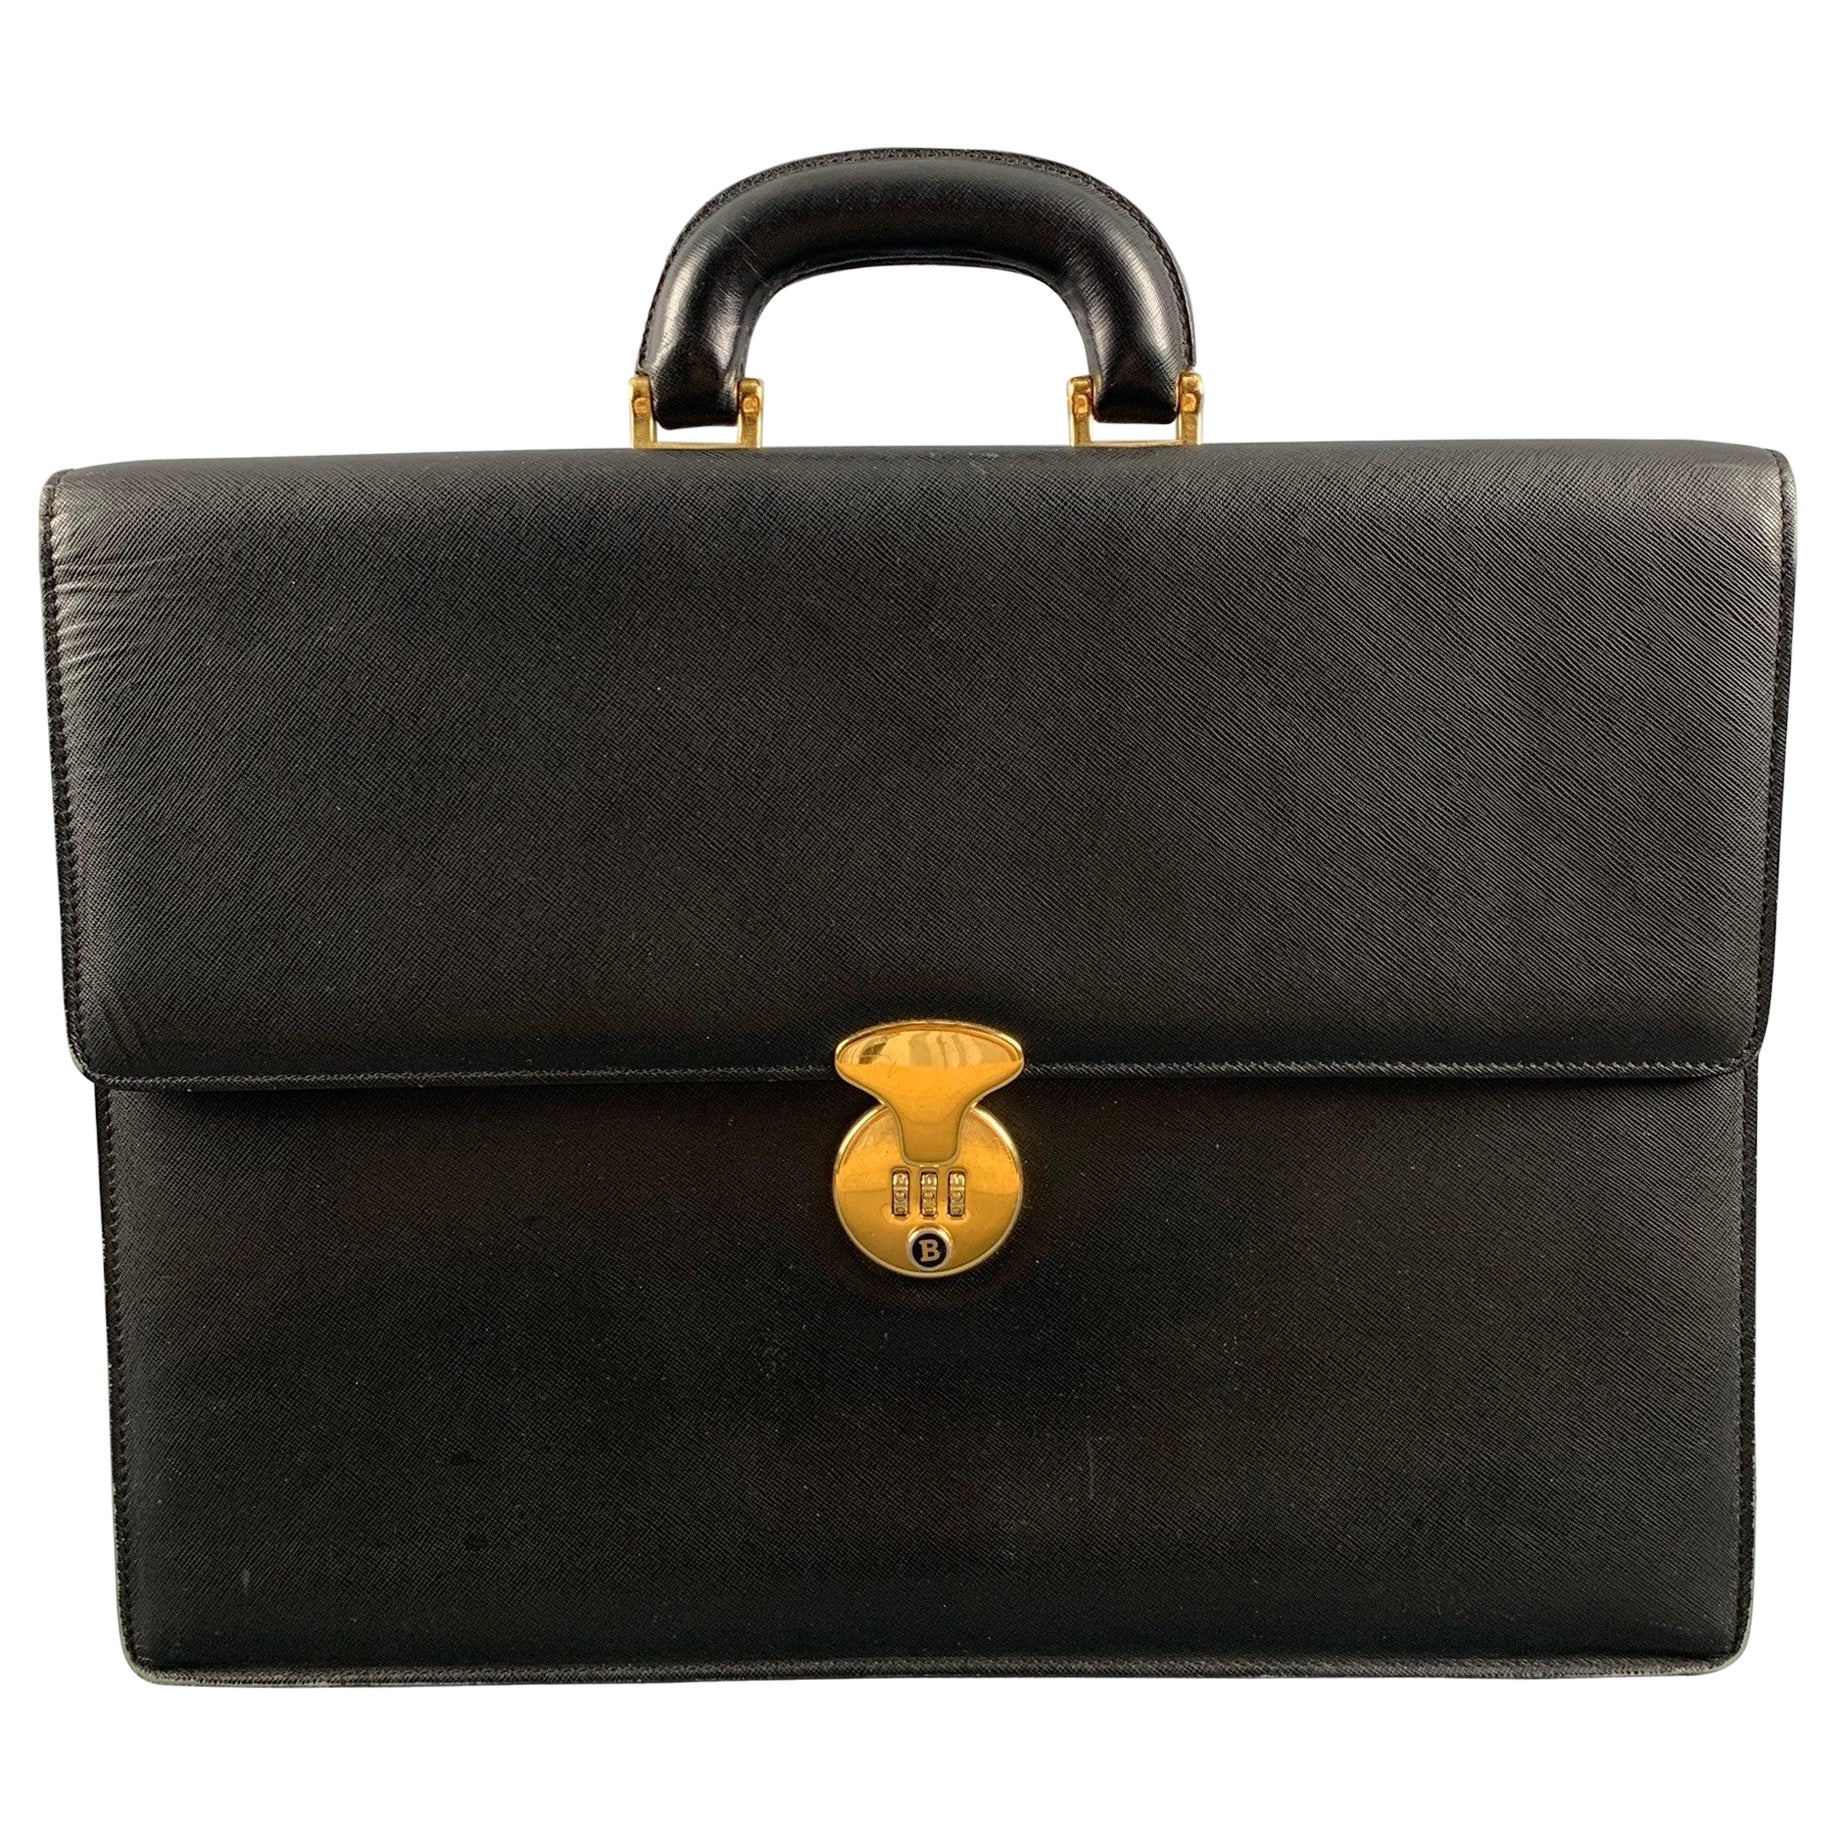 BALLY Black Leather Briefcase Bags